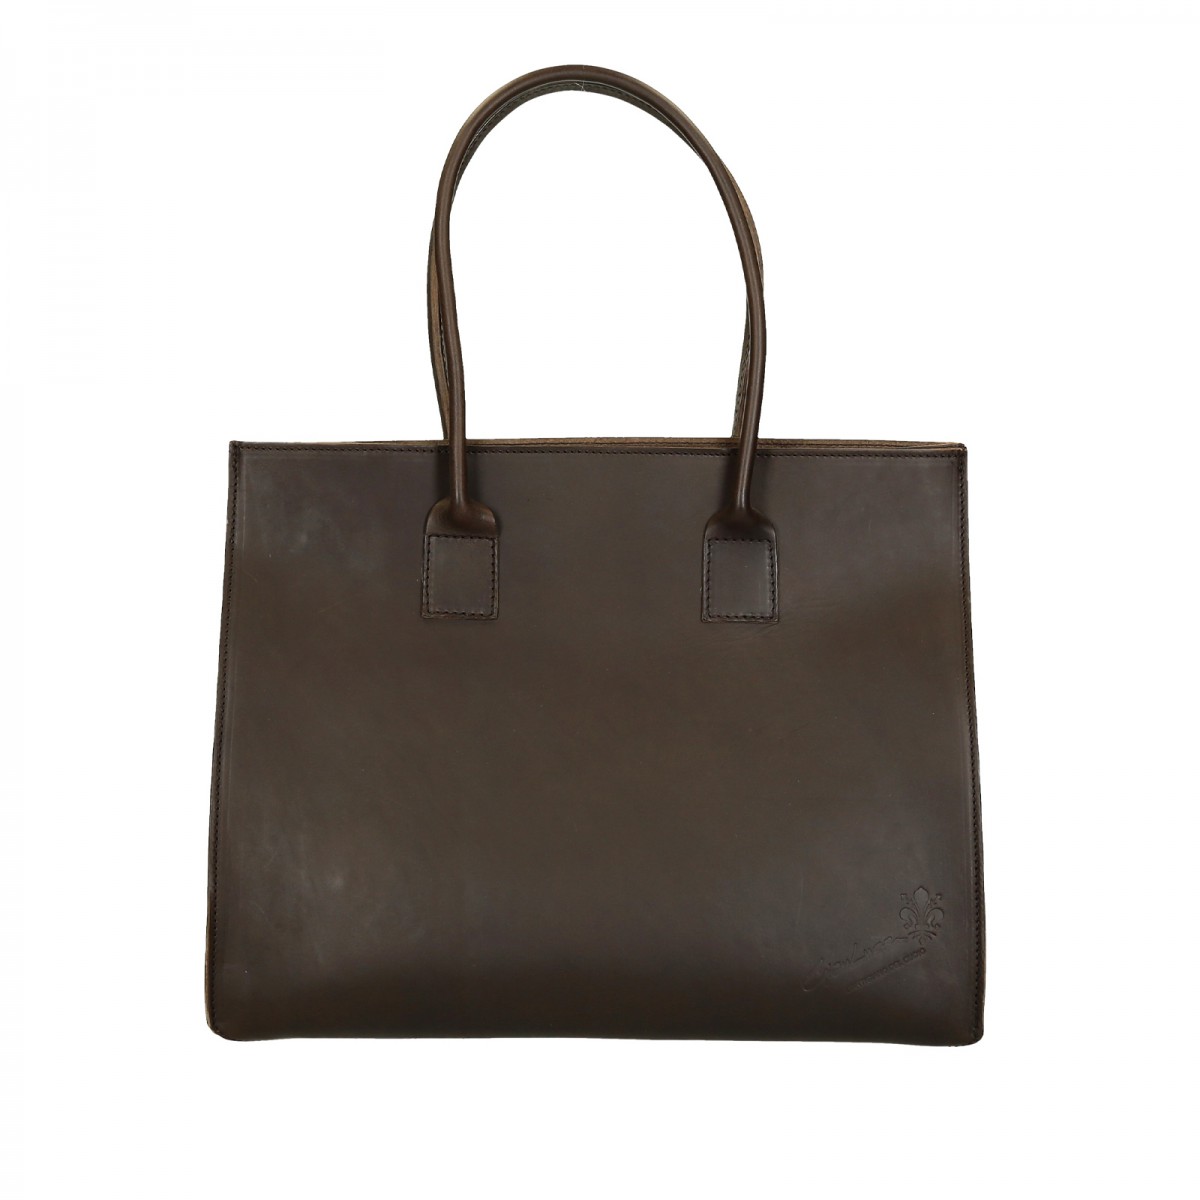 Brown leather tote bag for women Handmade | Gianluca - The leather craftsman